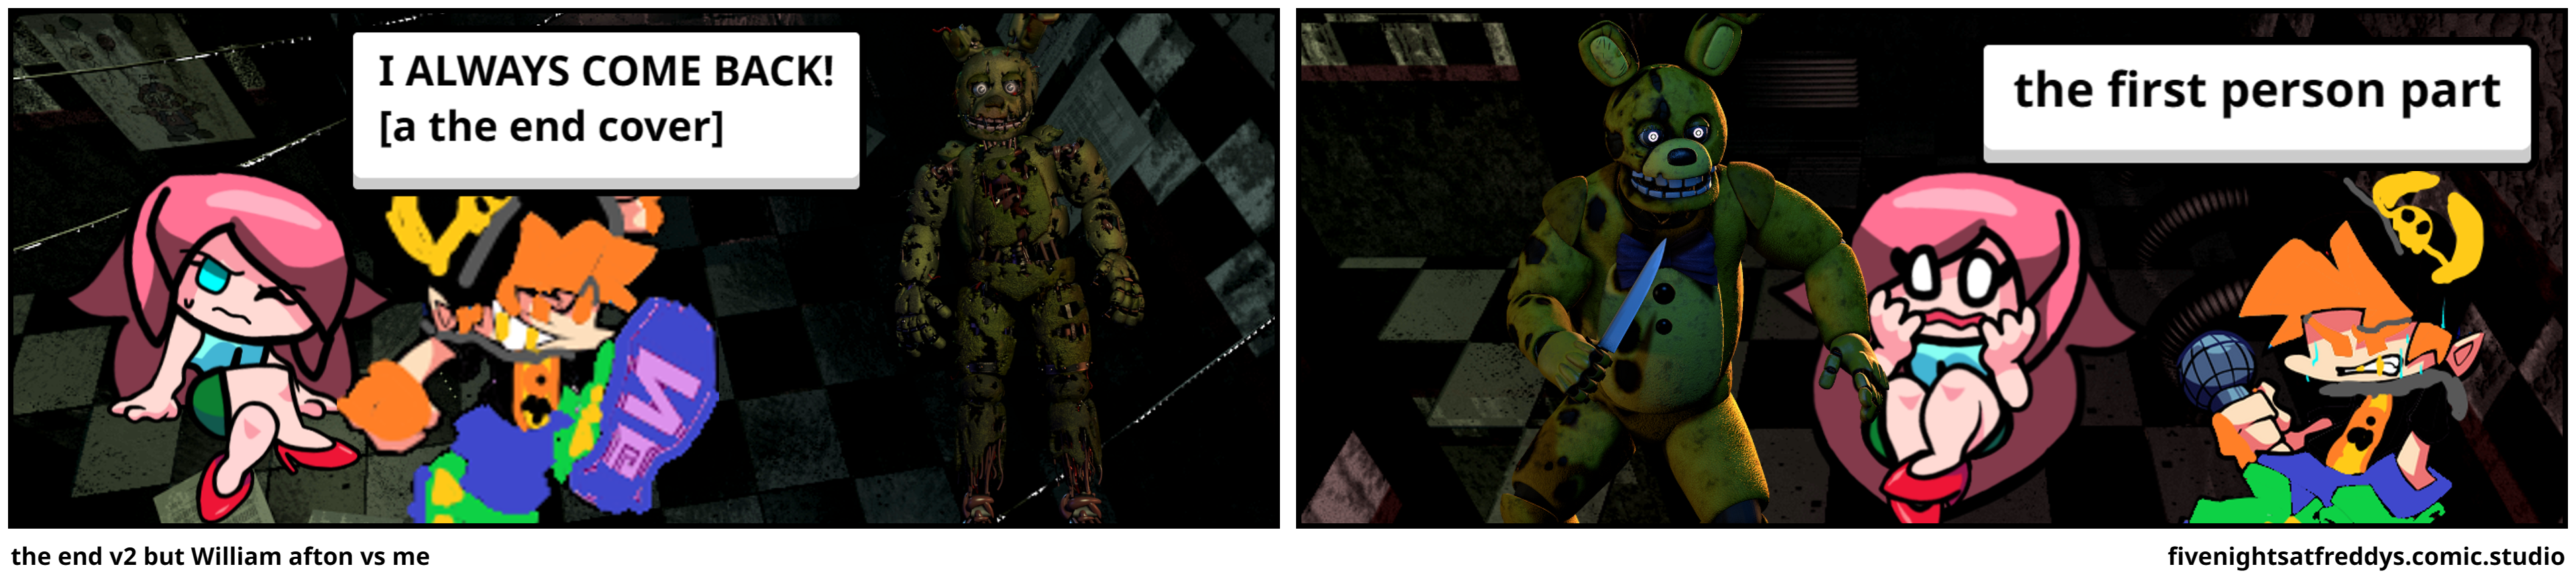 the end v2 but William afton vs me